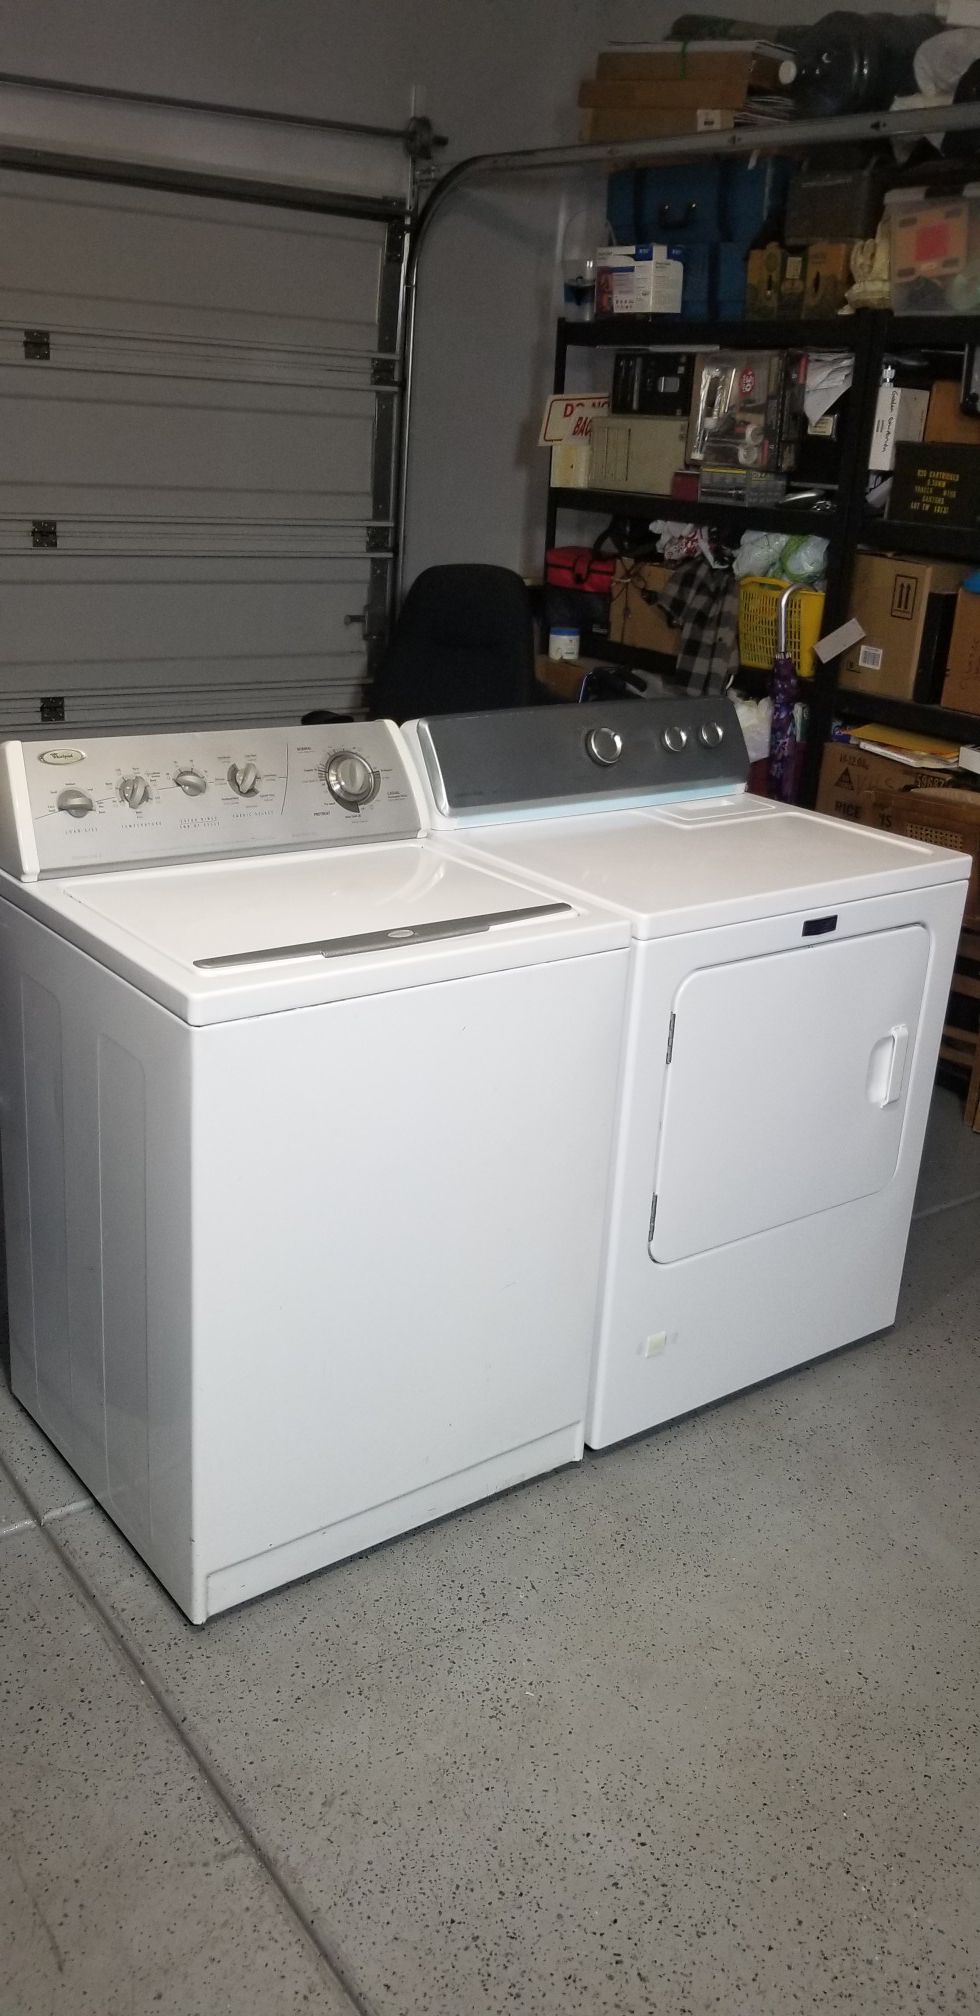 Whirlpool Gold Washer And Maytag Gas Deyer